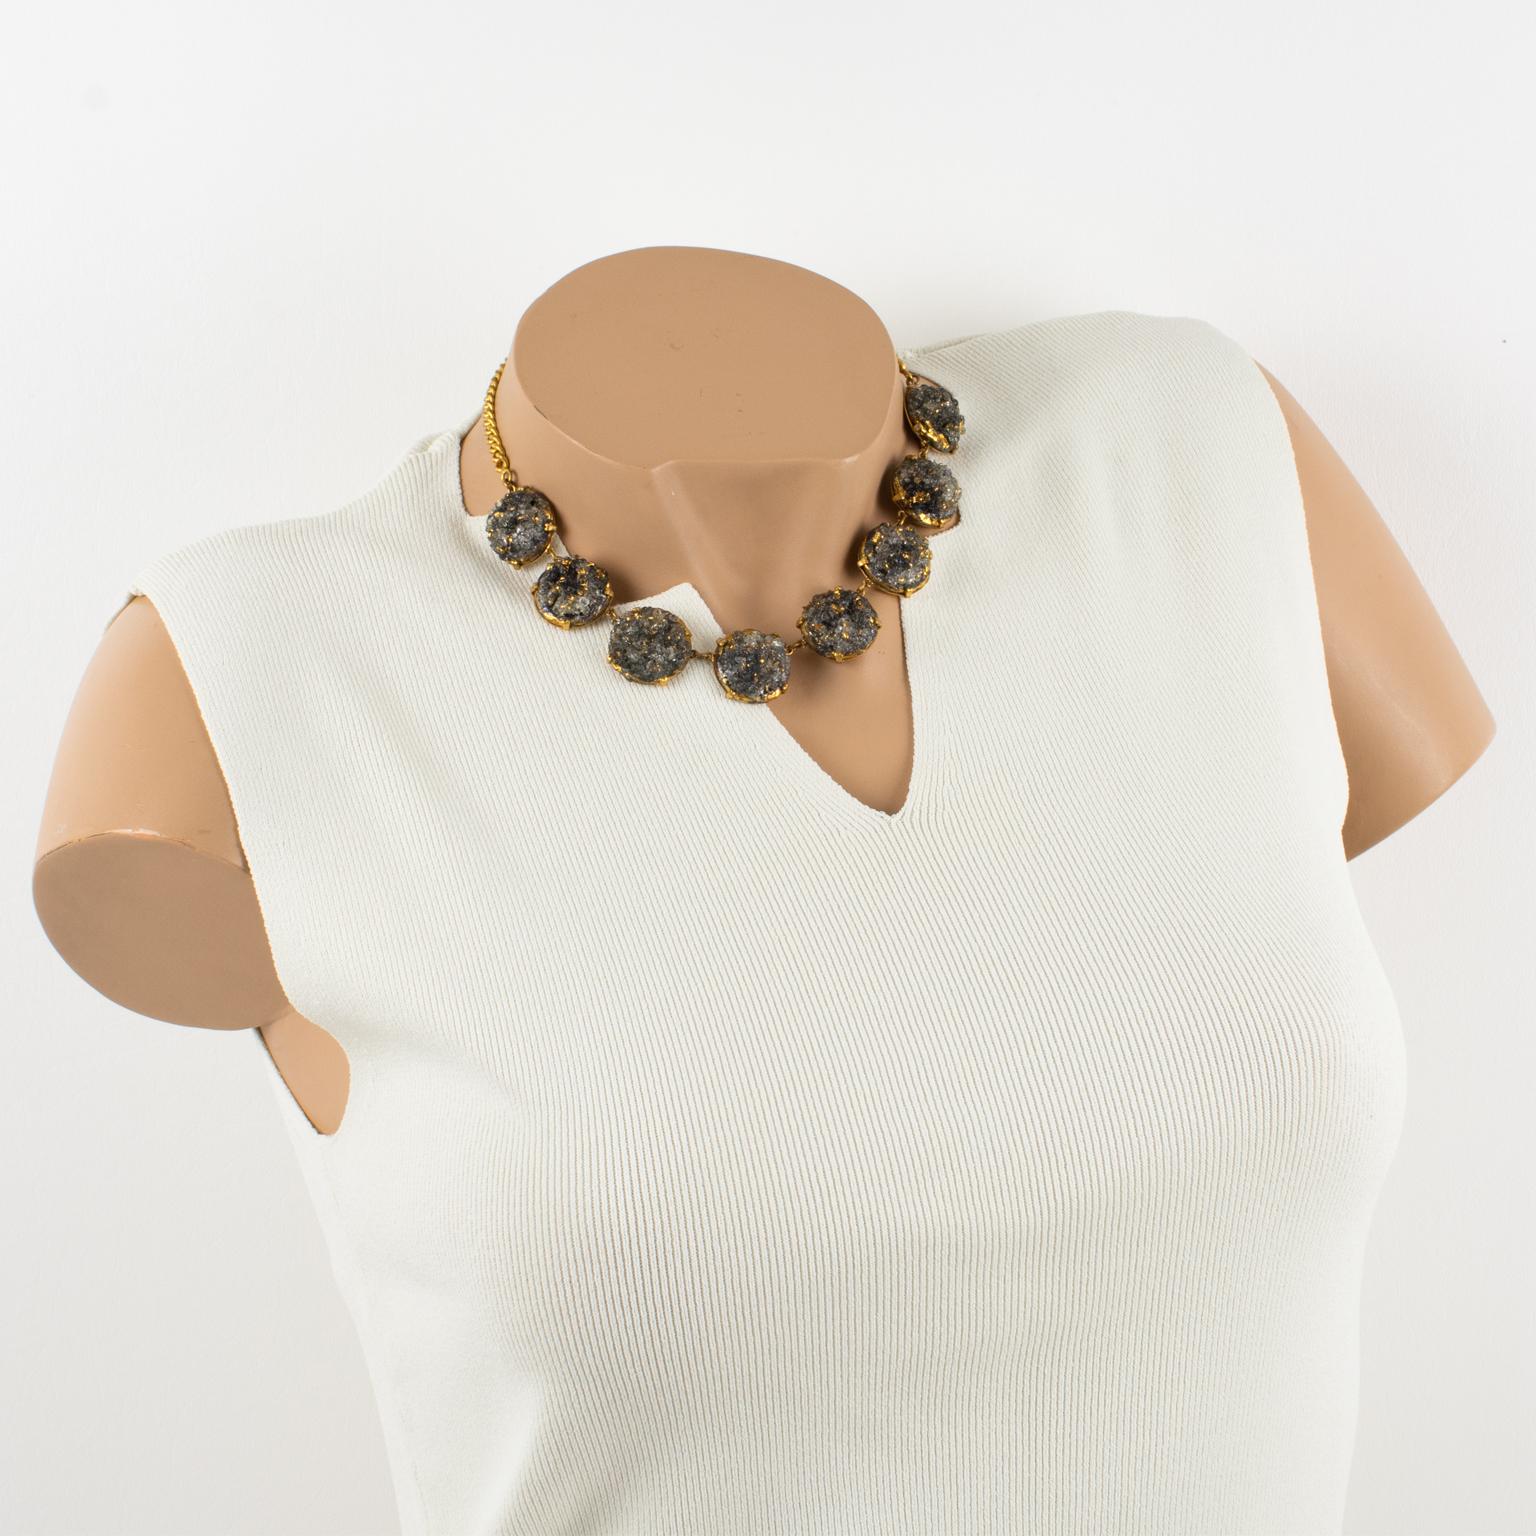 This beautiful enamel and pate de verre link choker necklace was produced in Limoges, France, in the 1950s. The enameled round domed copper elements are hinged with a gilded brass chain. This popular 1950s and 1960s technique named 